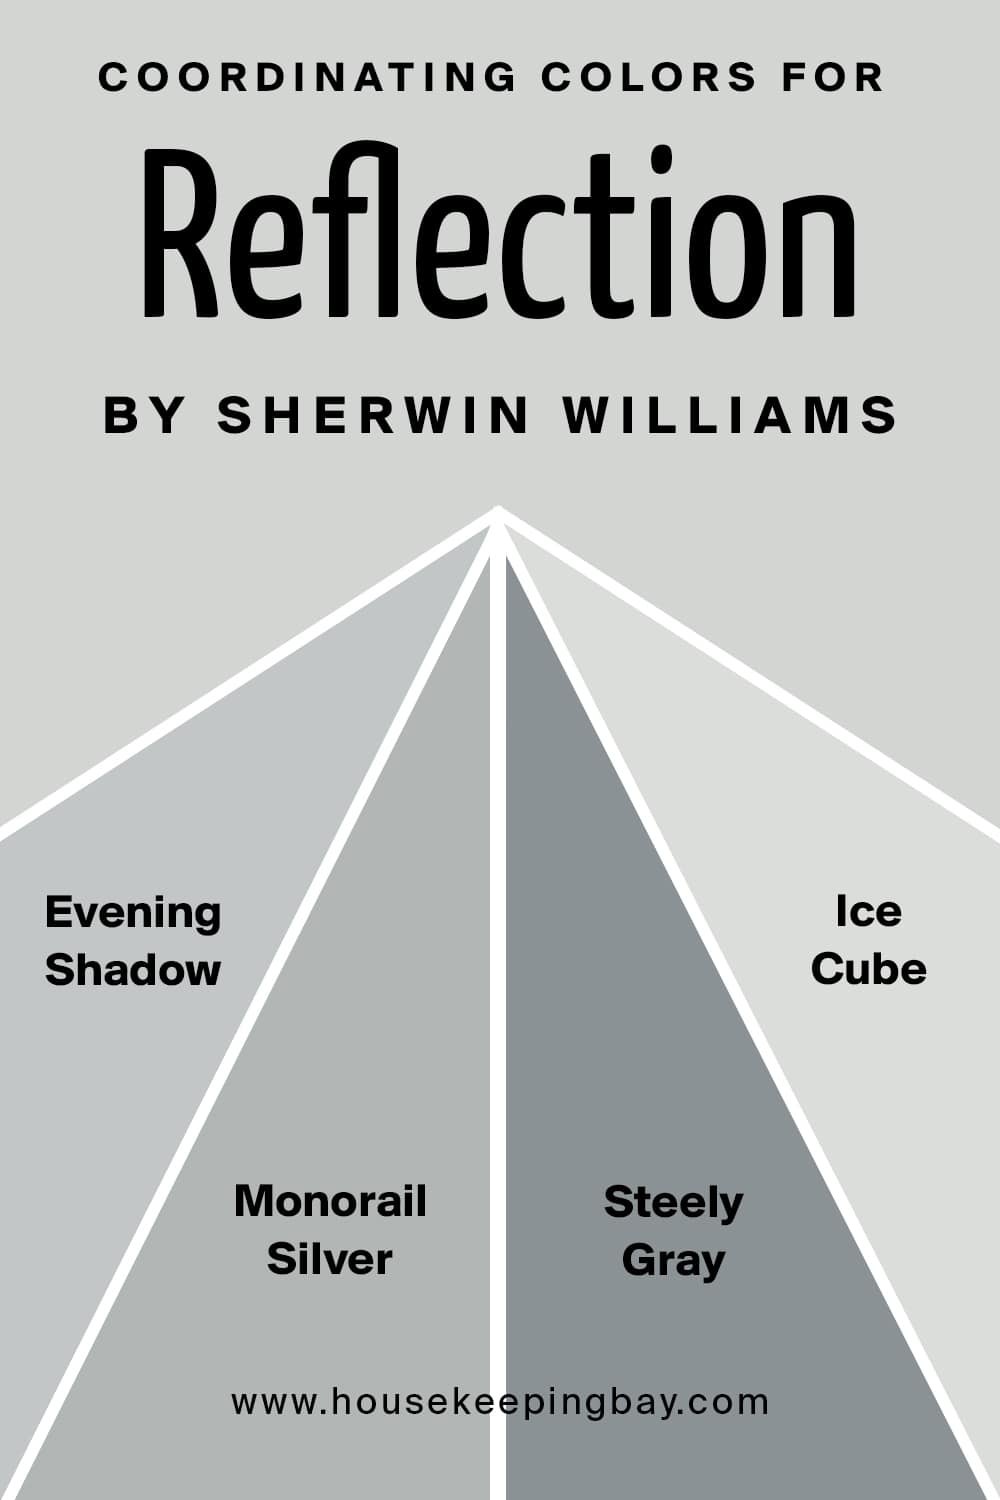 Coordinating Colors for Reflection by Sherwin Williams